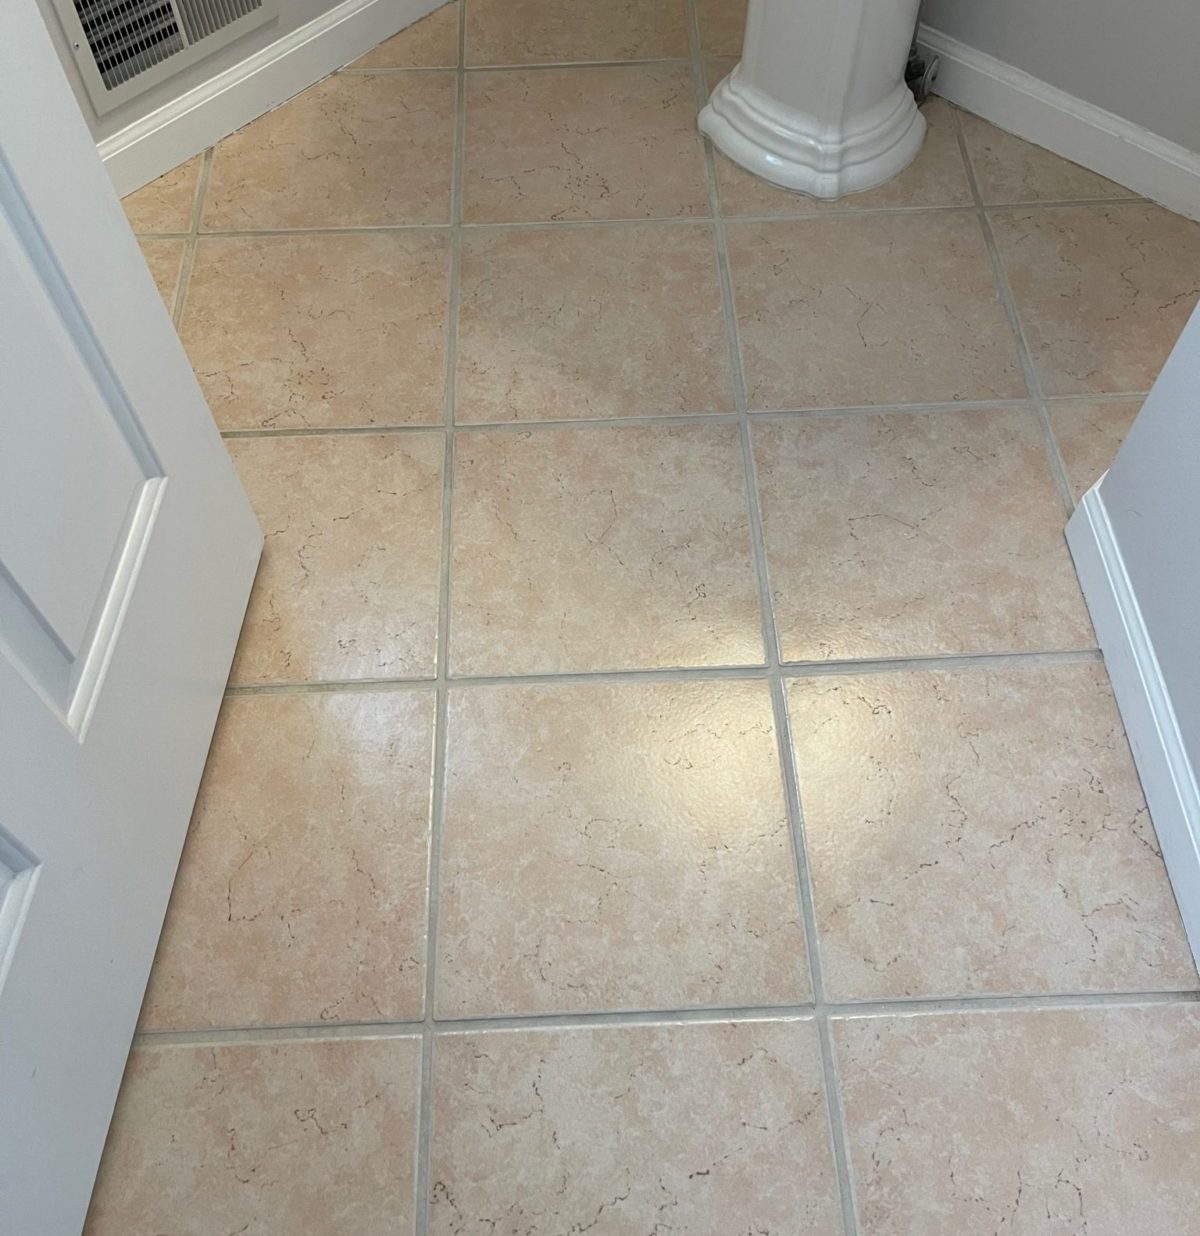 Cost of Tile and Grout Cleaning